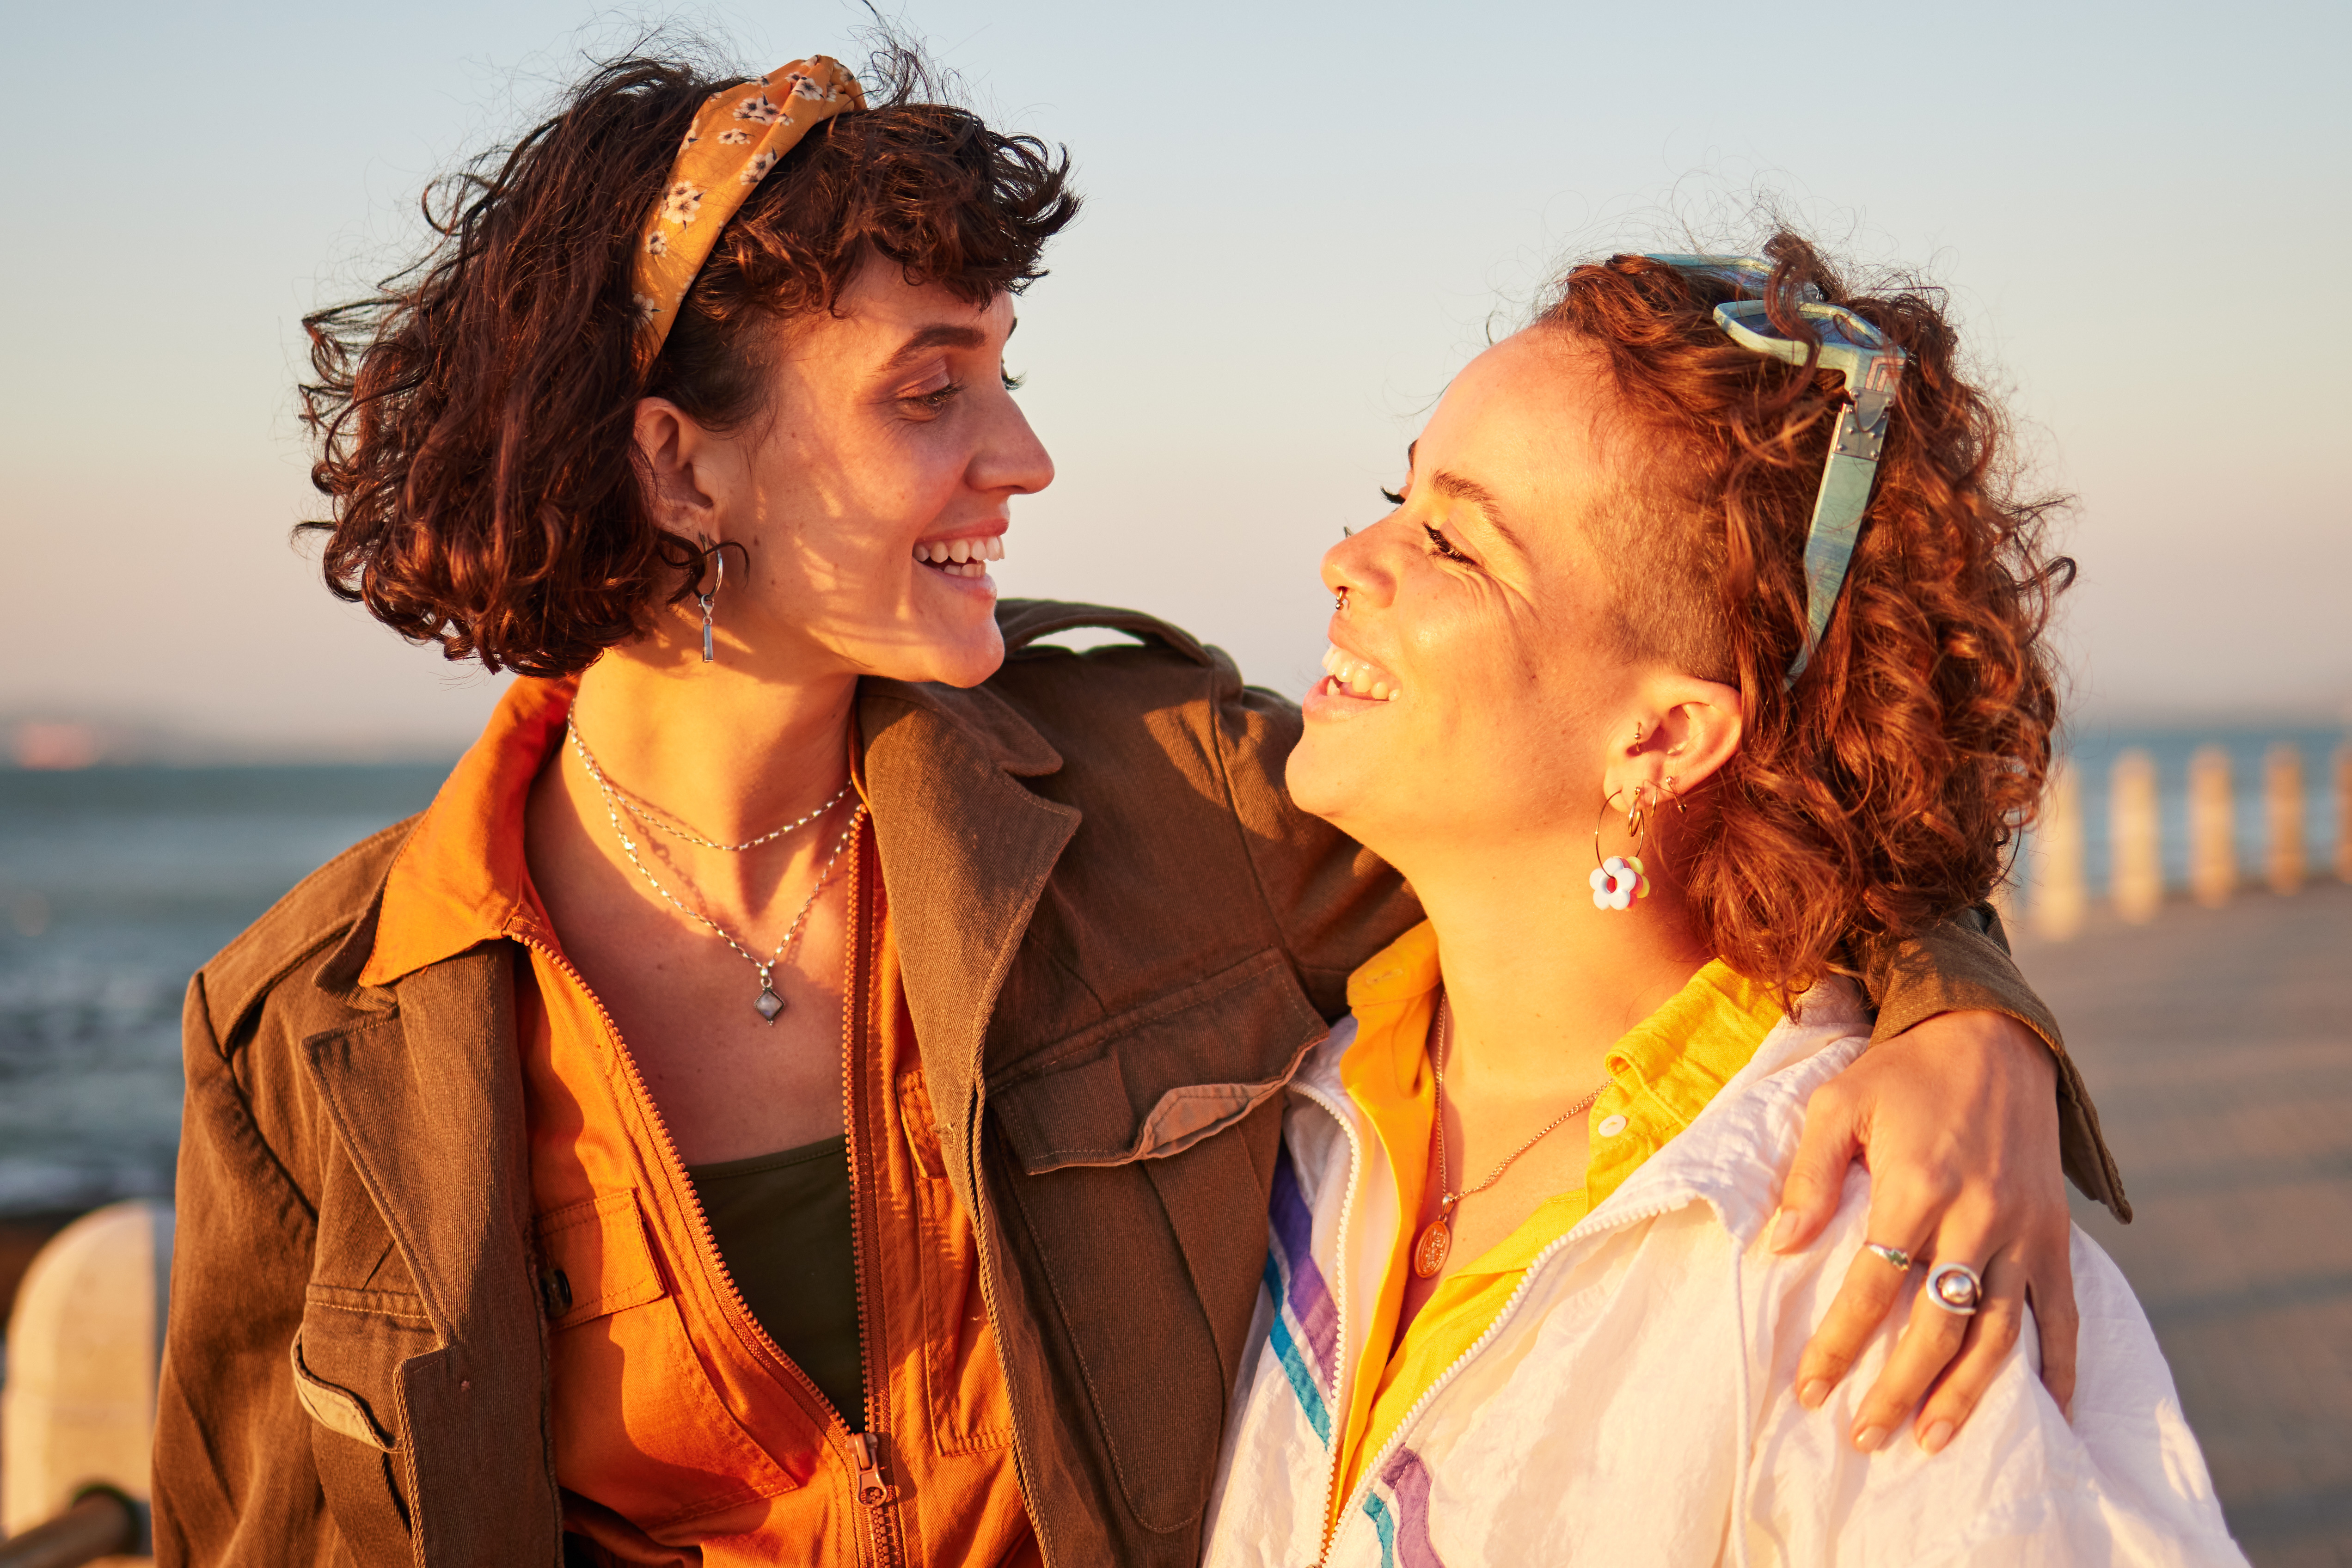 Two women smiling at each other during sunset